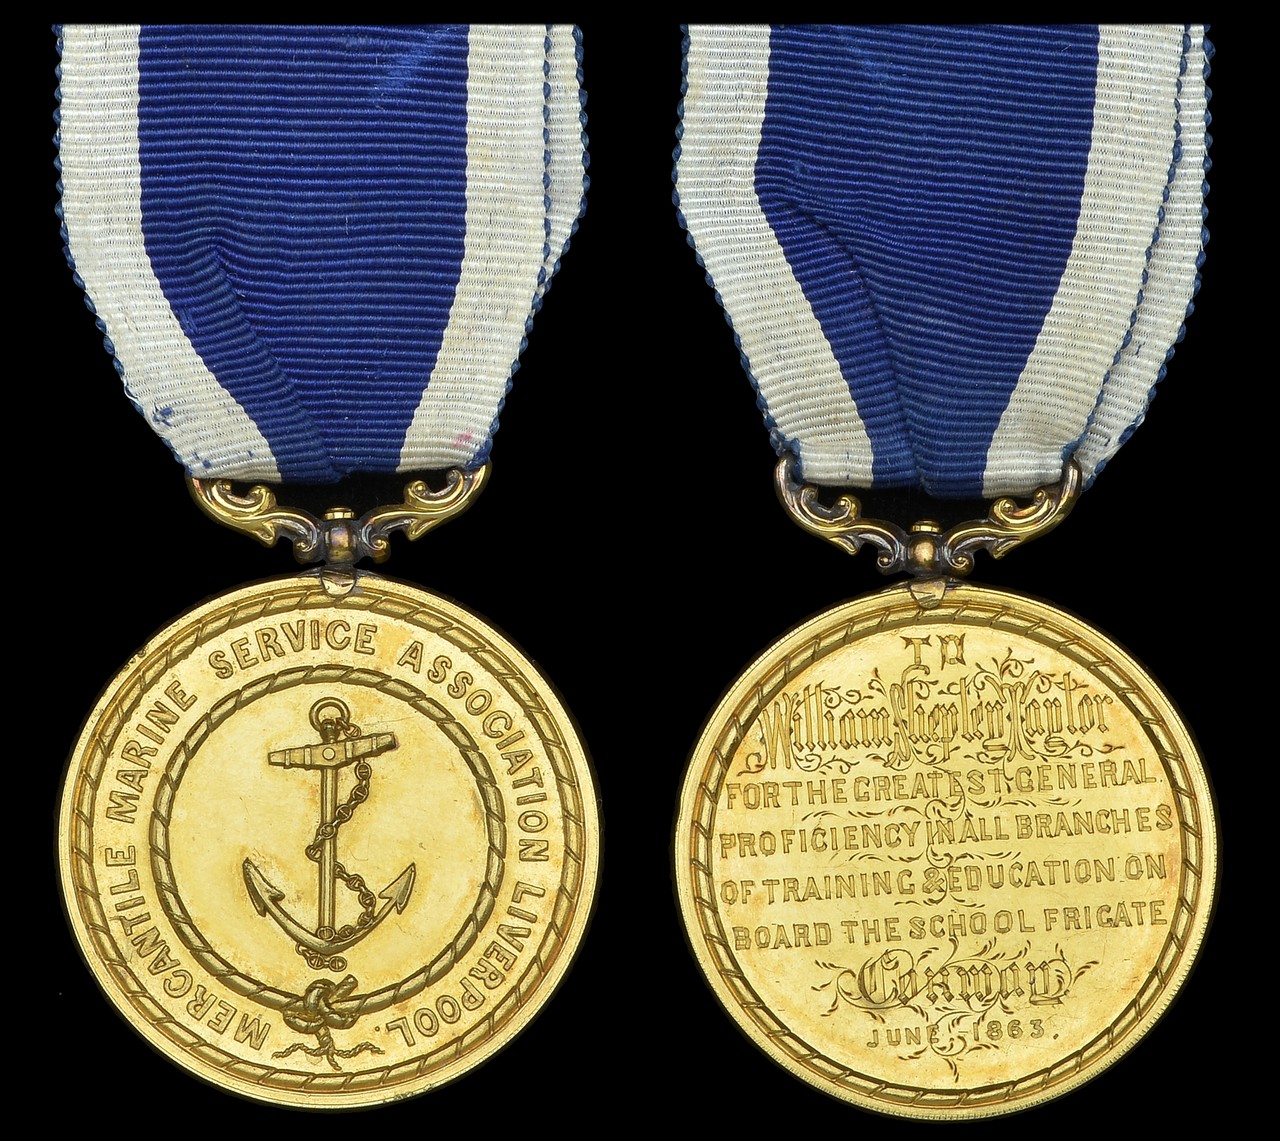 Mercantile Marine Service Association of Liverpool, silver-gilt prize medal (To William Shepley